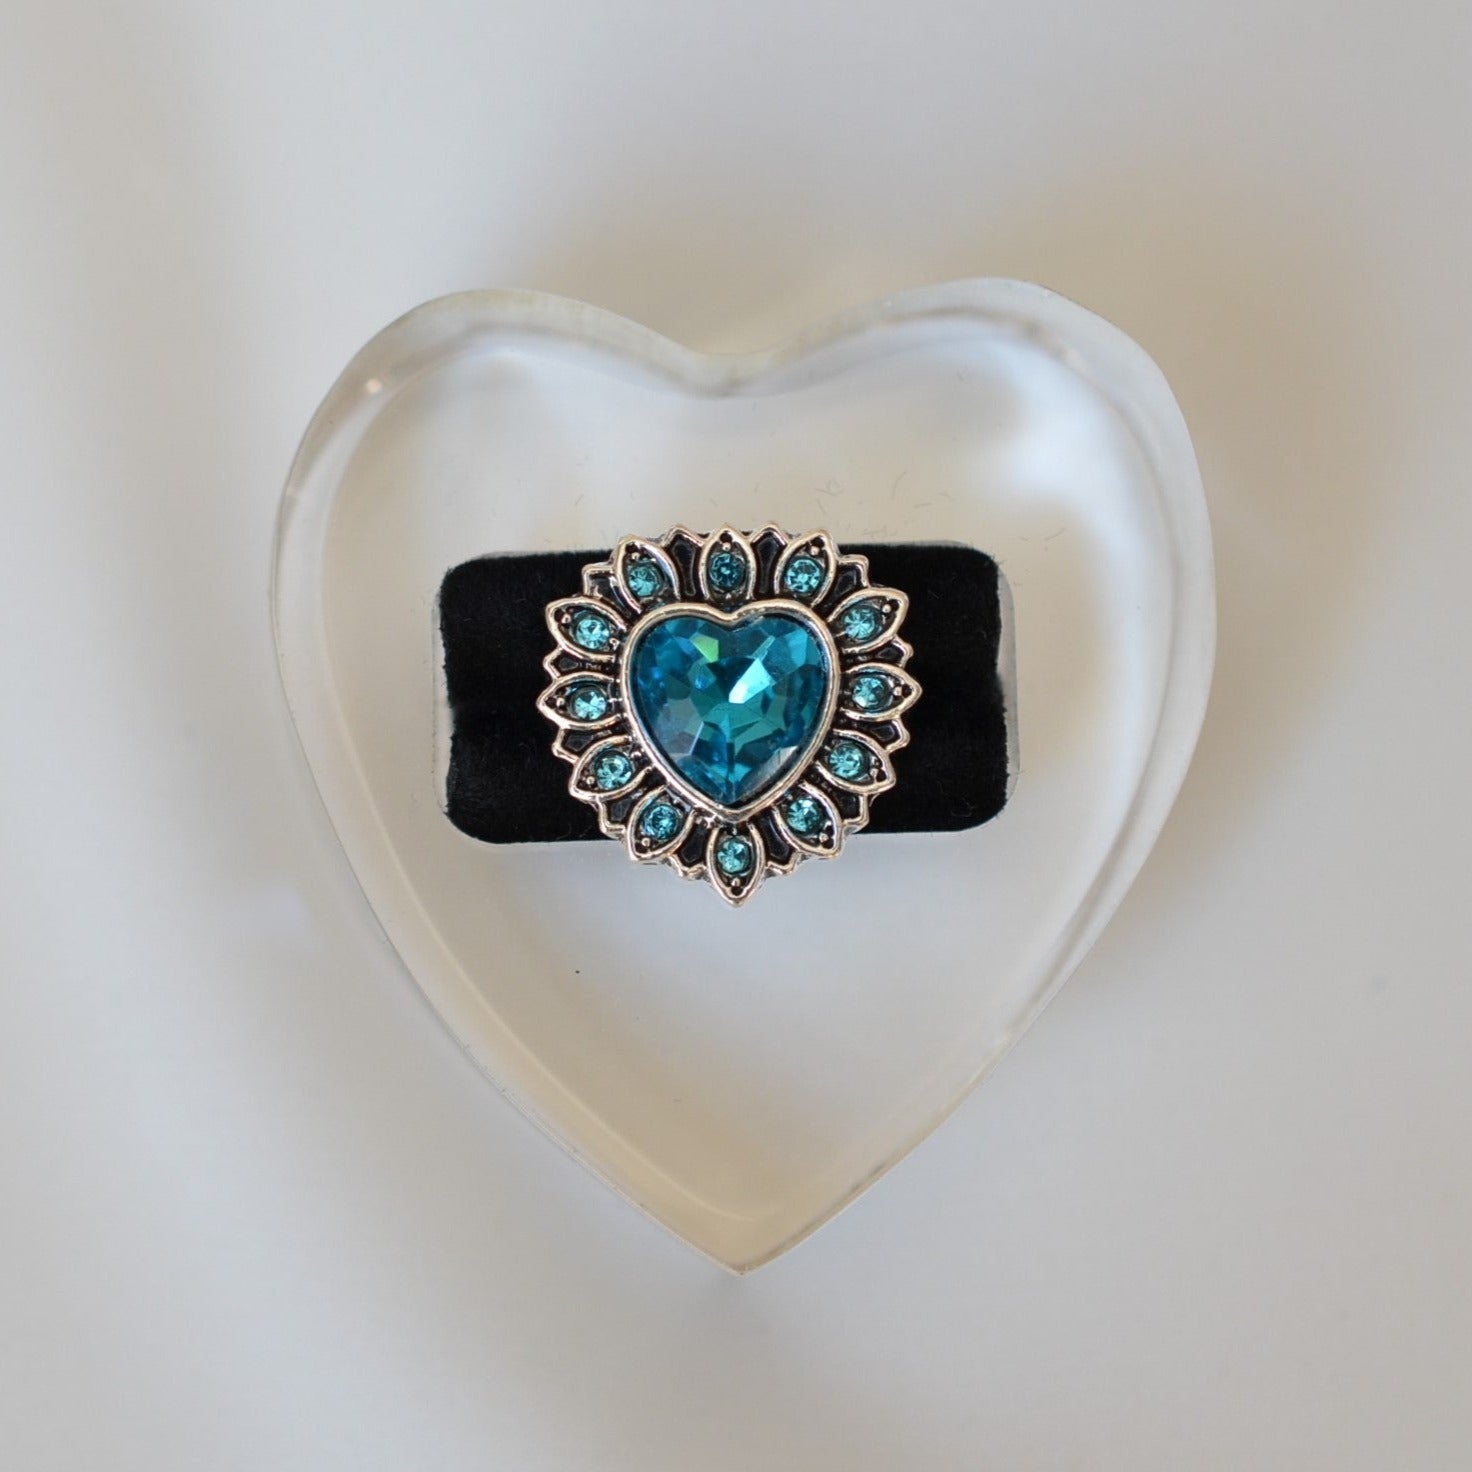 Beautiful Blue Heart Charm for Watch Bands, Belts and Bags